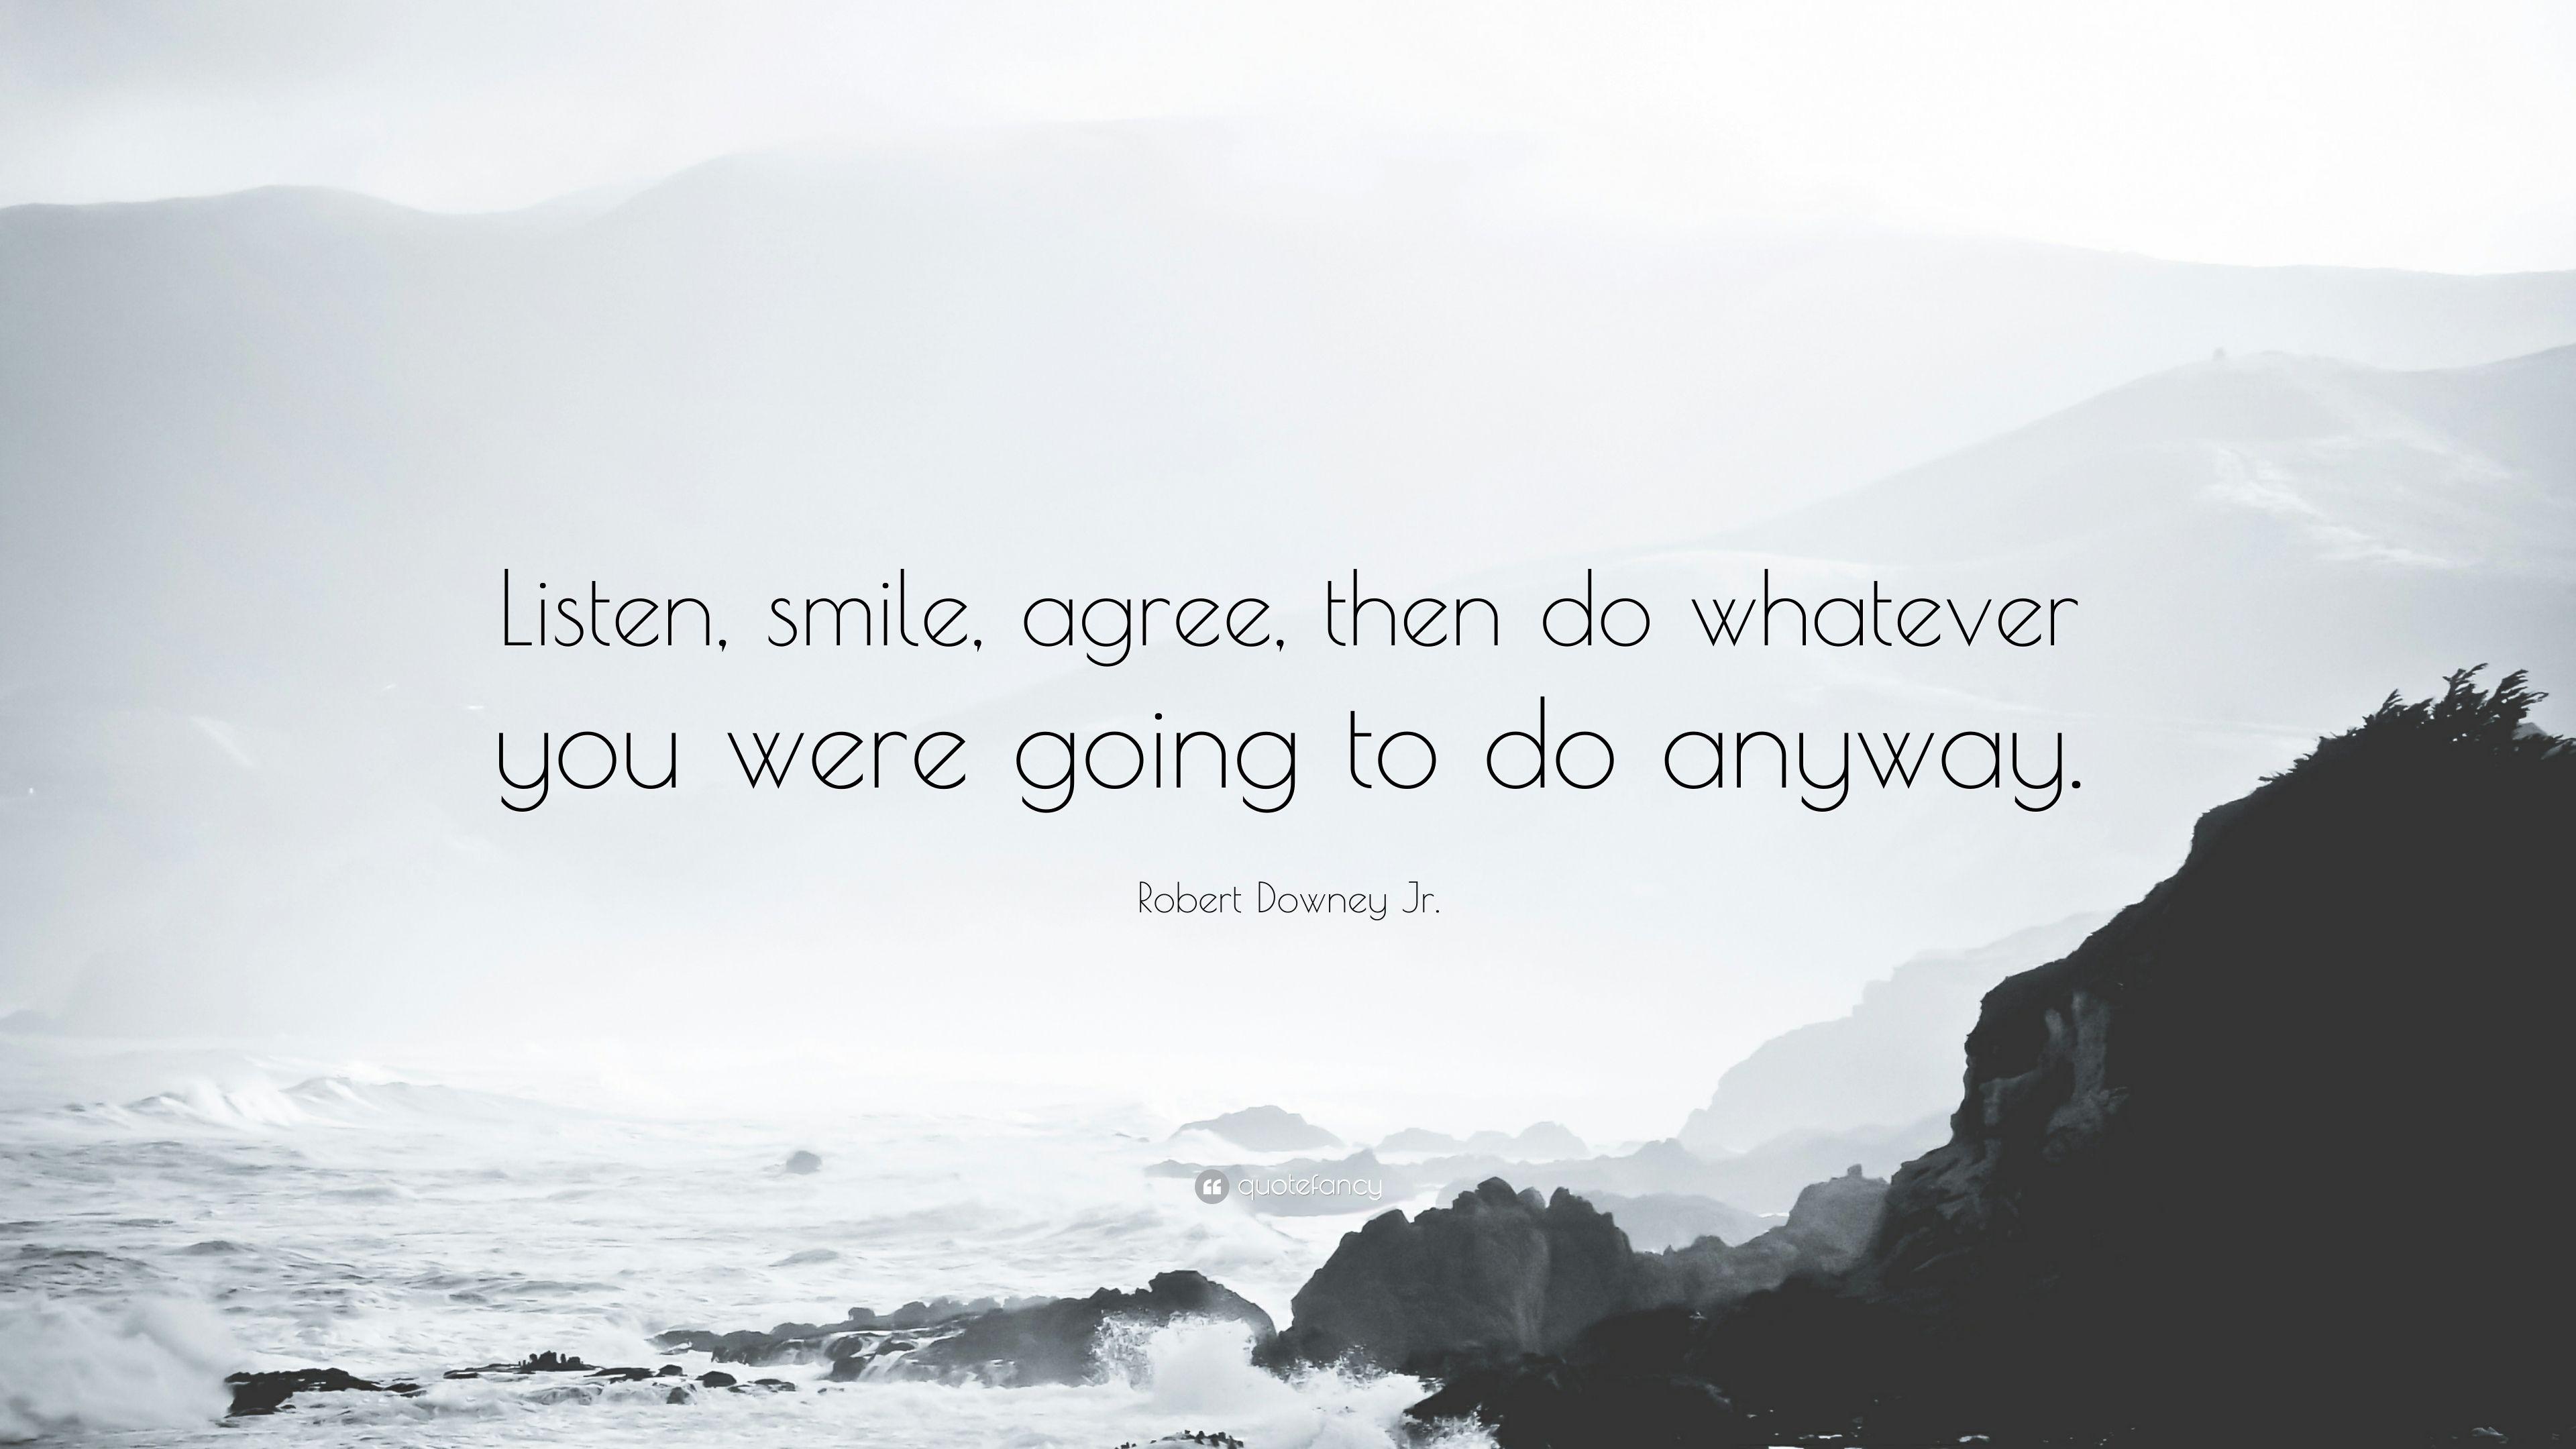 Robert Downey Jr. Quote: “Listen, smile, agree, then do whatever you